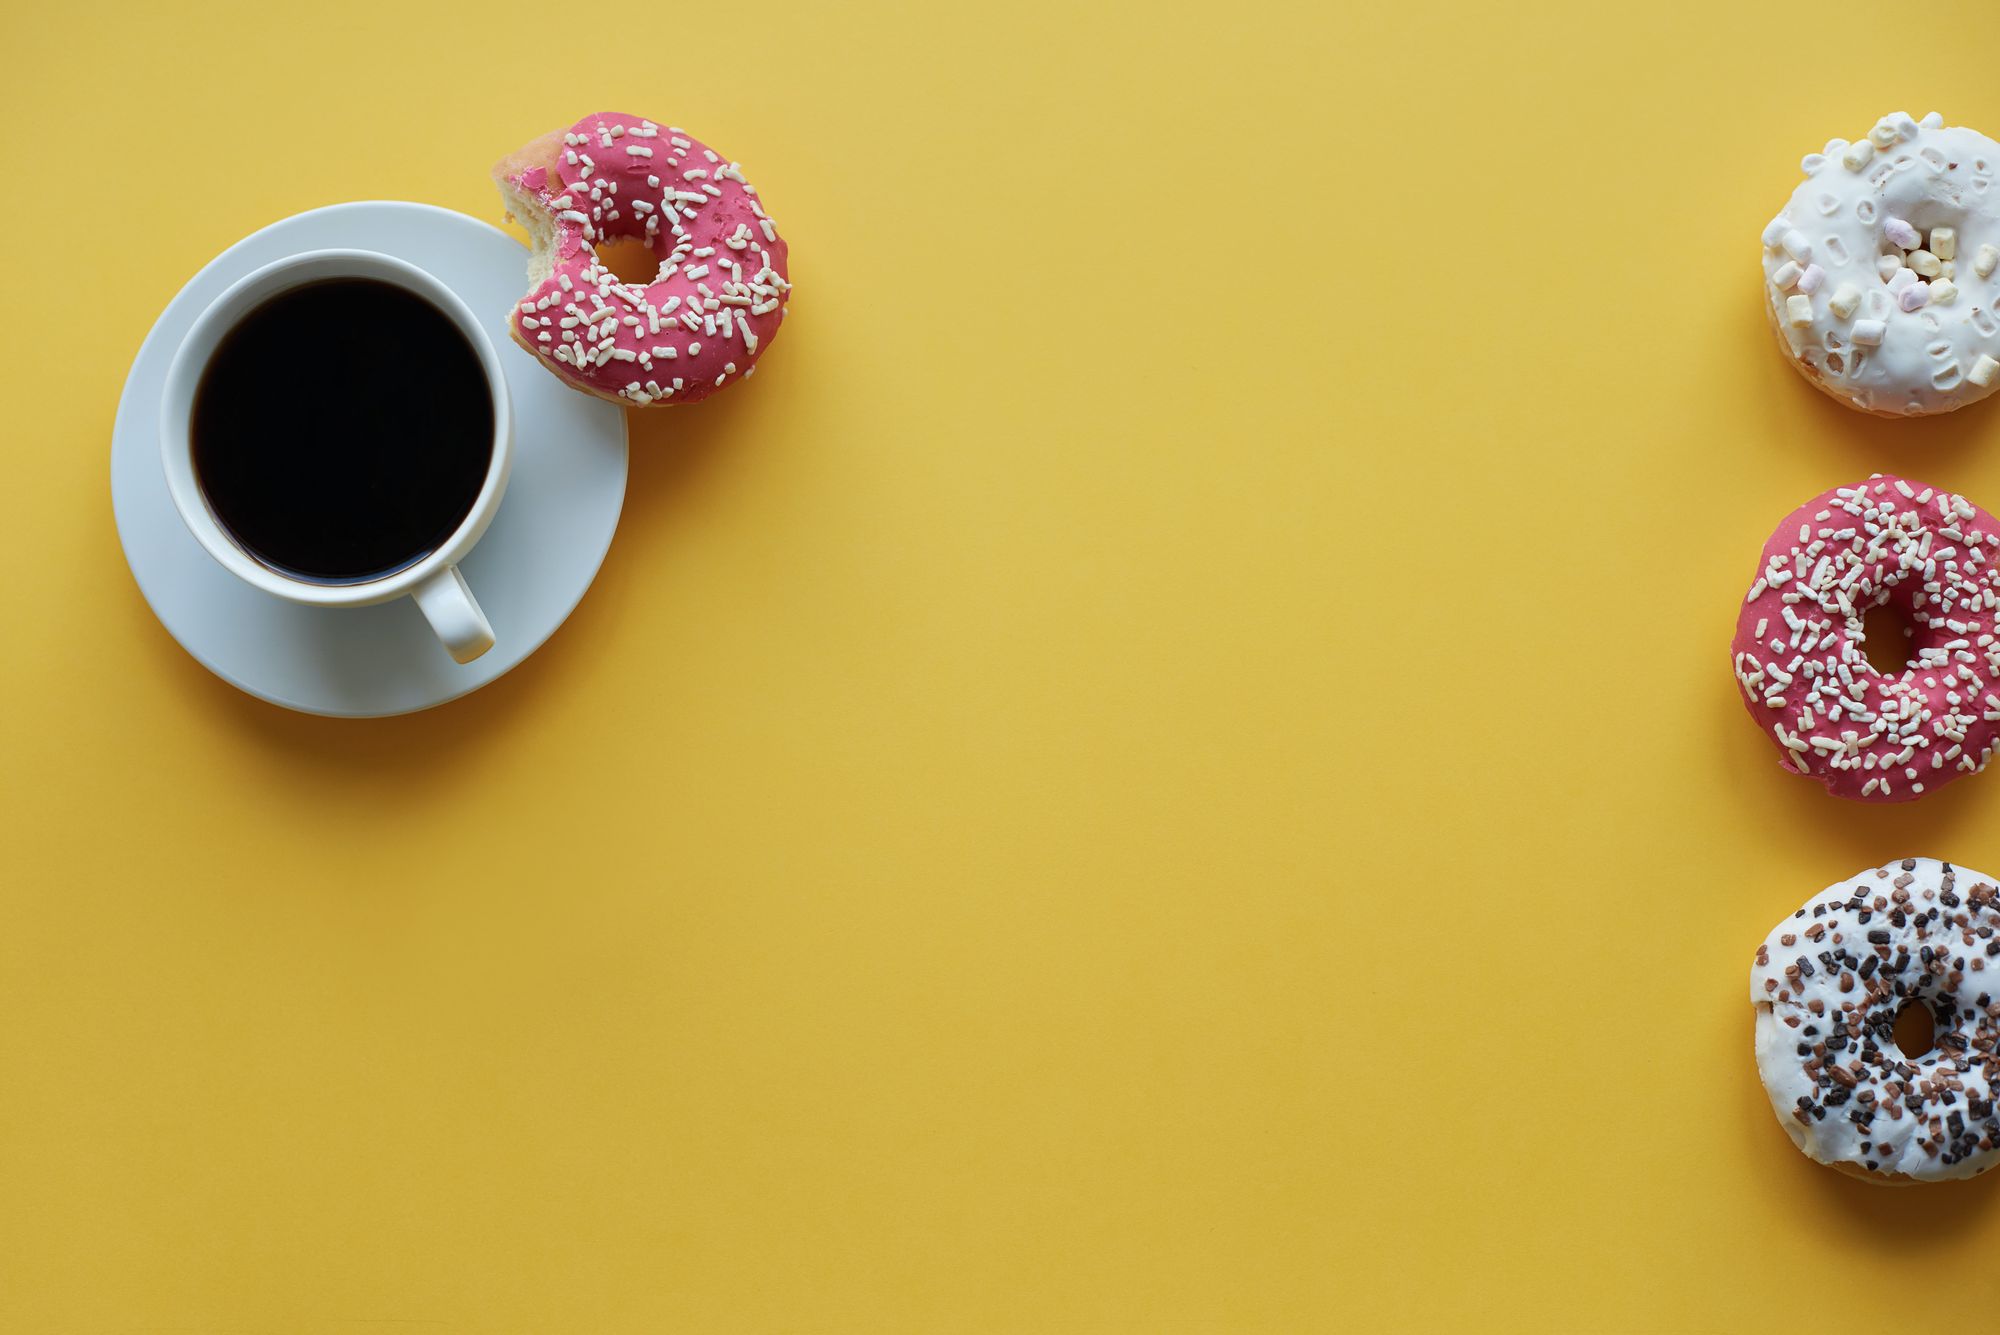 Picture of a coffee cup with several doughnuts